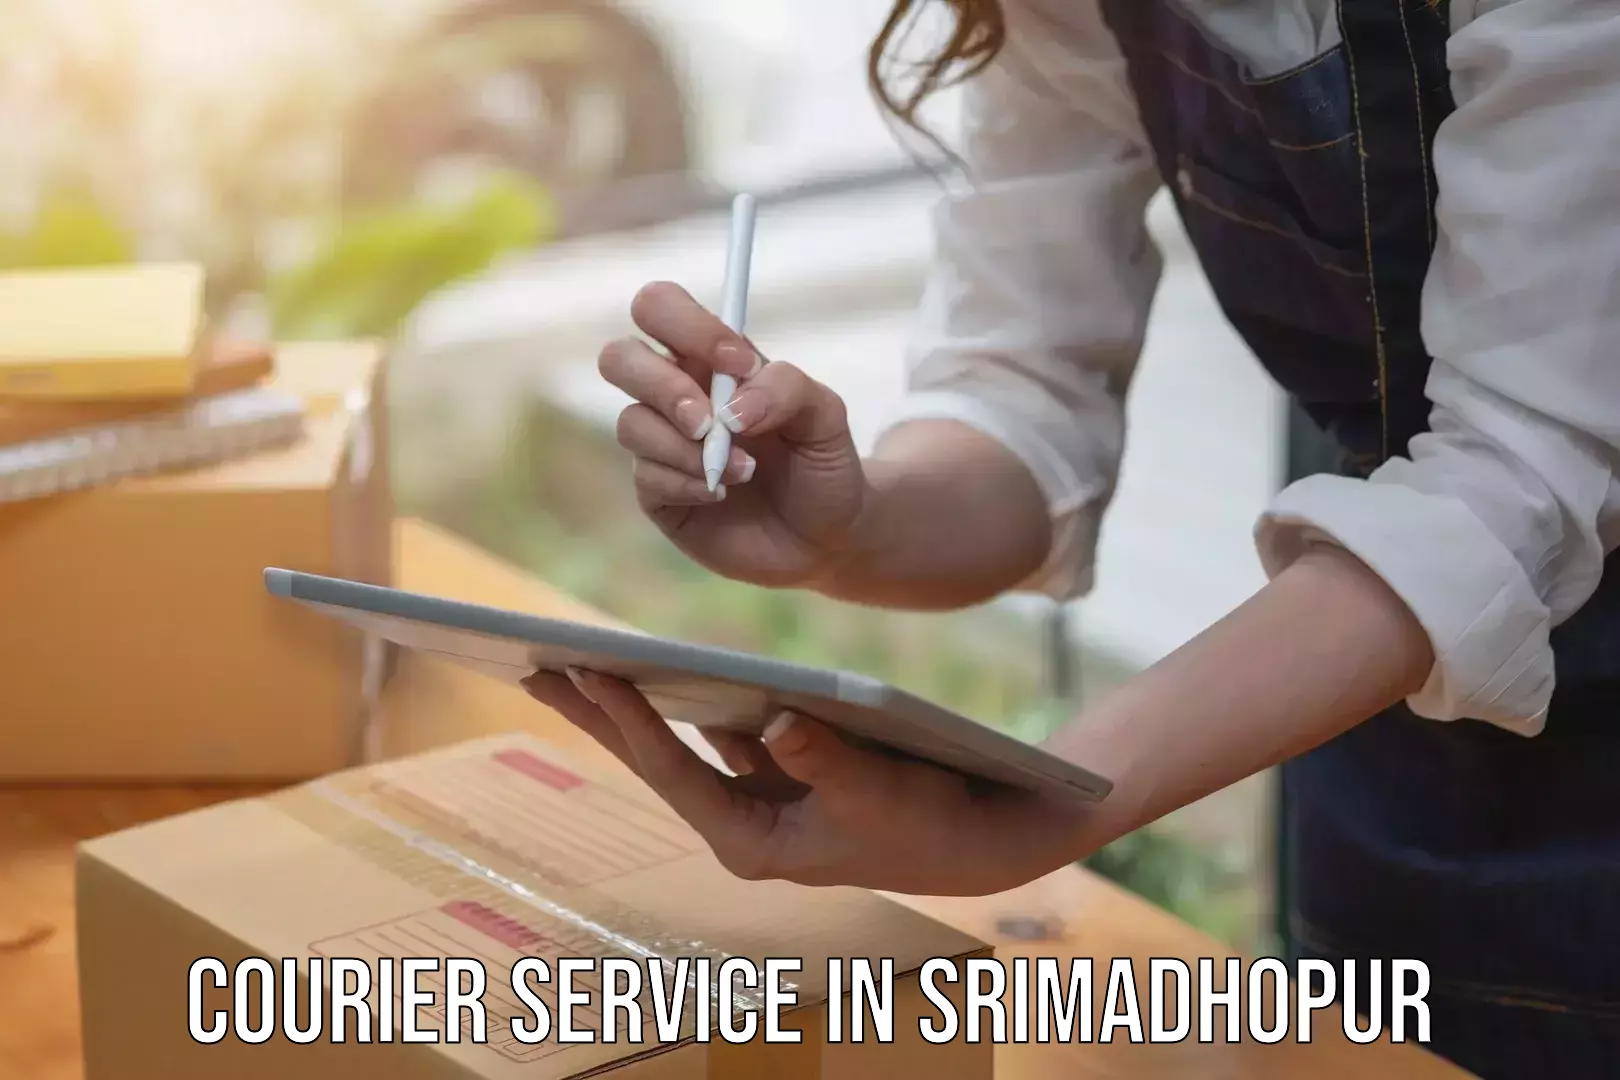 Professional parcel services in Srimadhopur